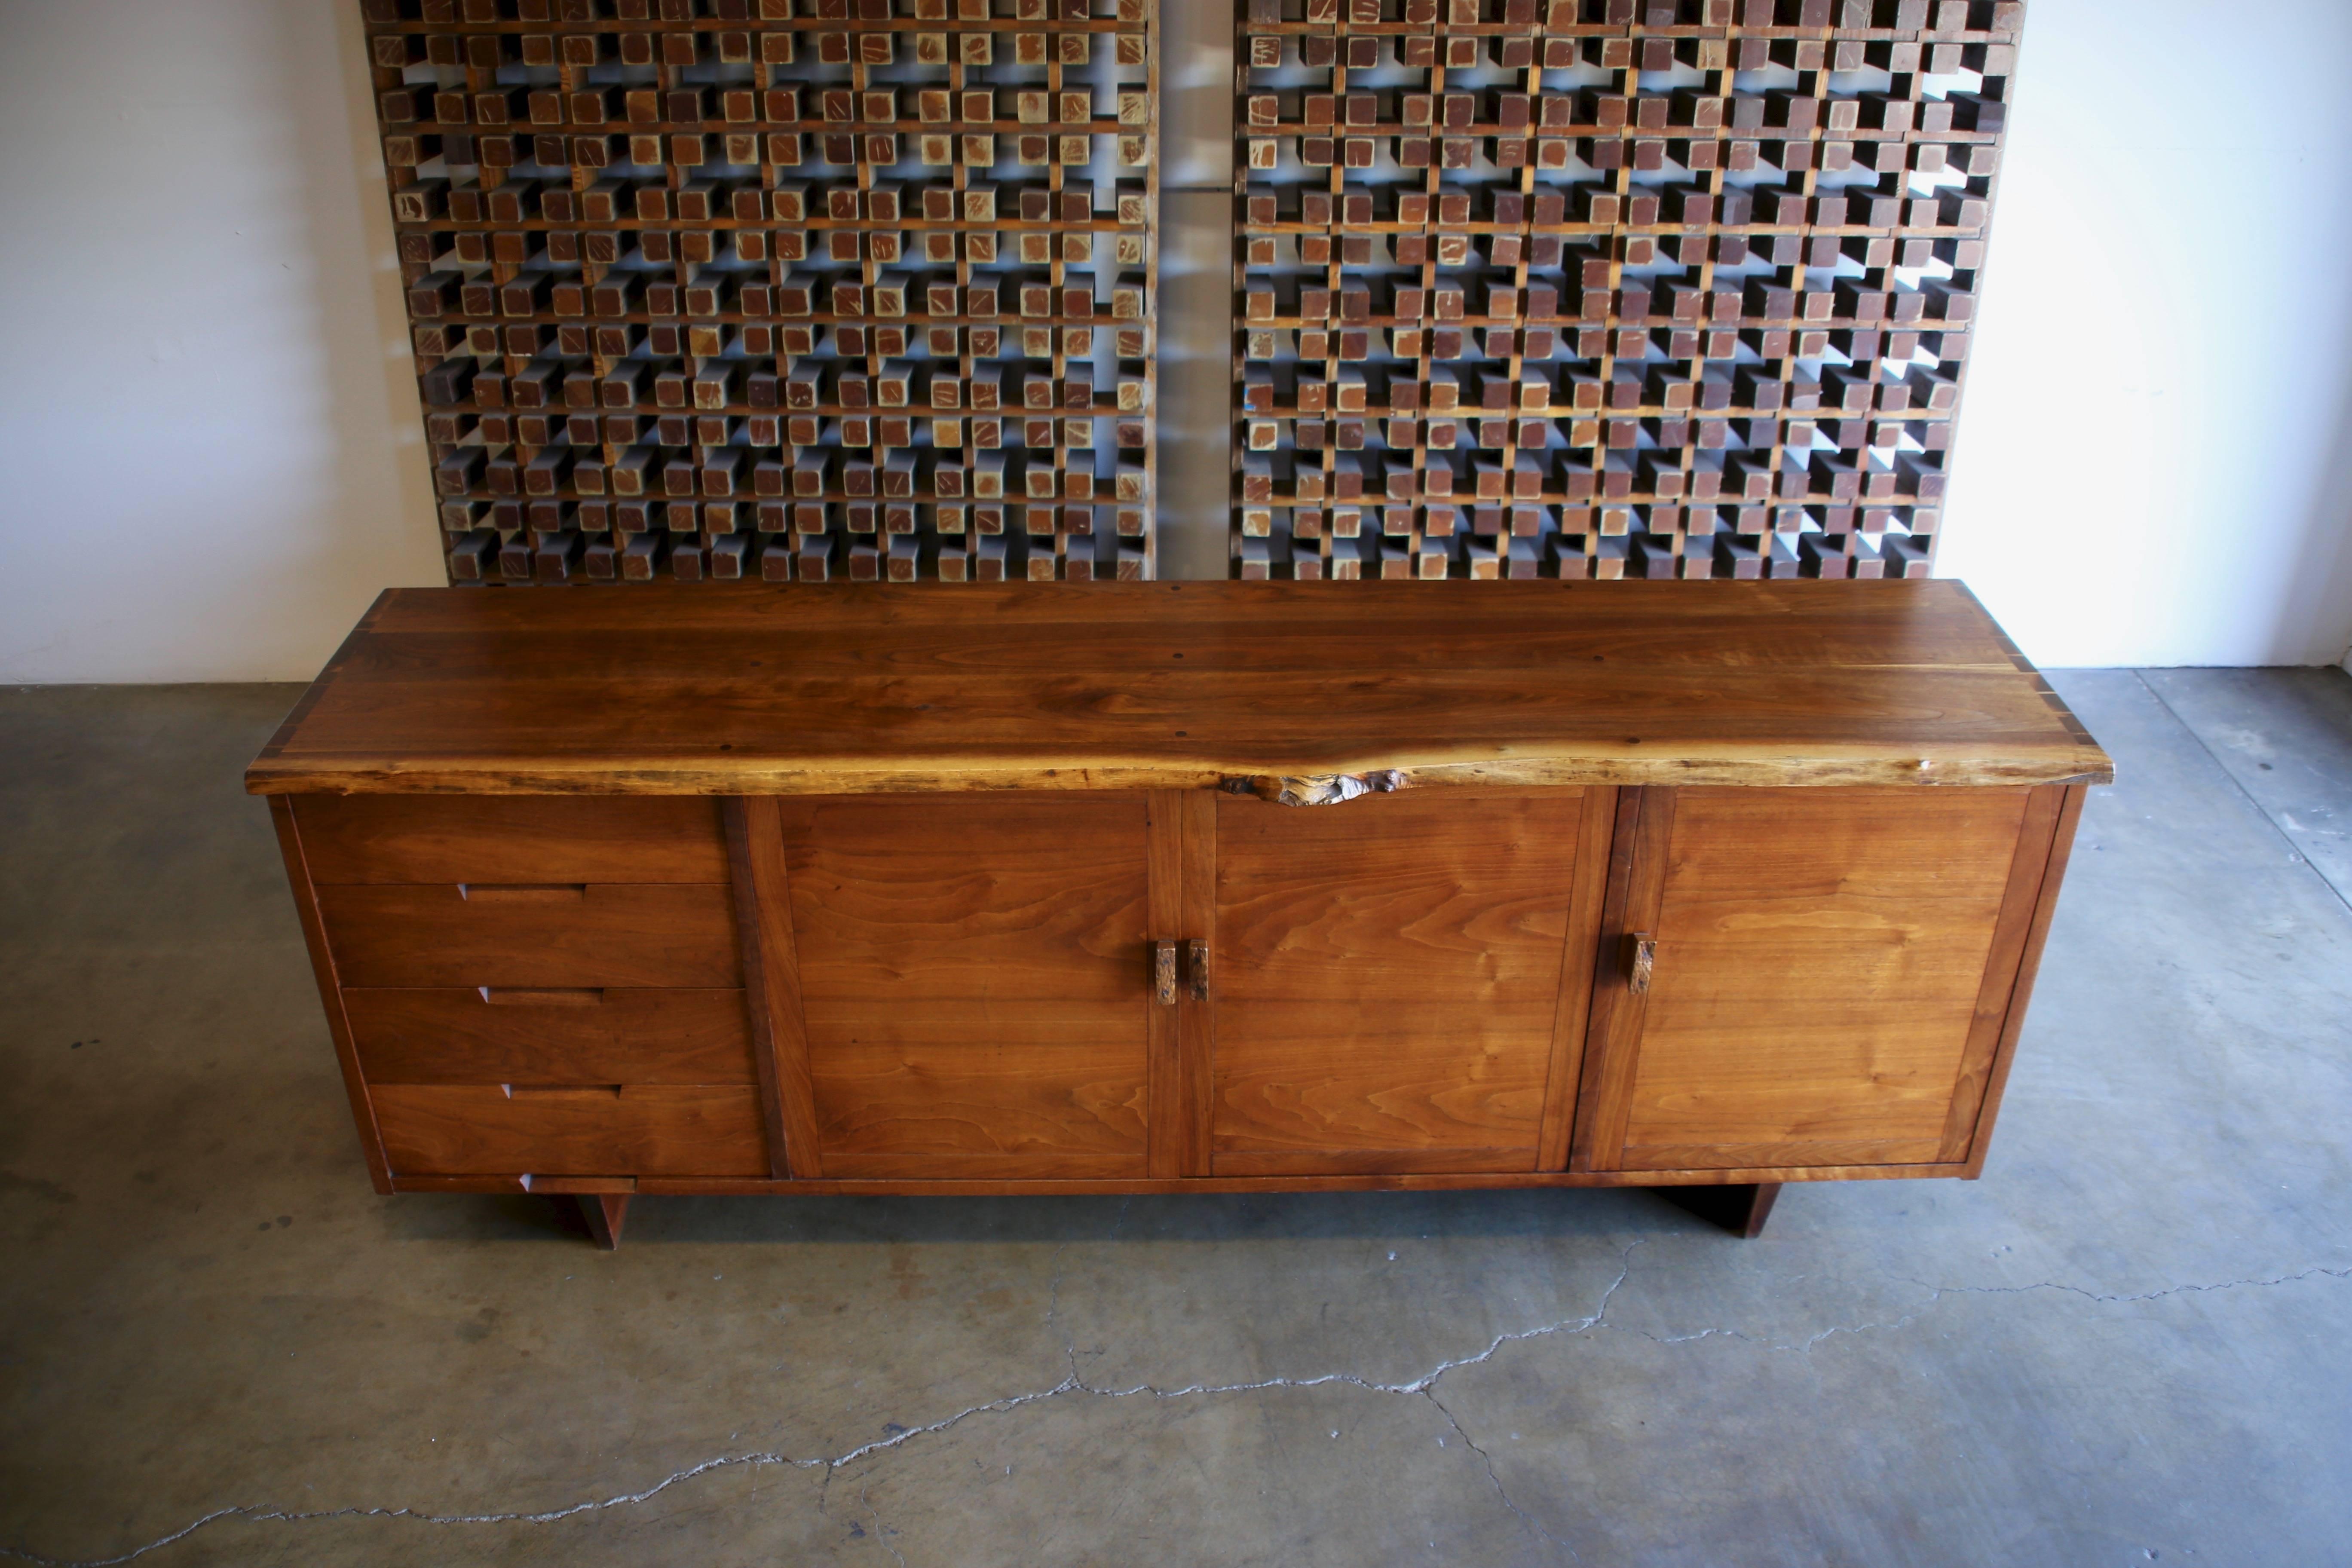 Studio crafted custom credenza by Gino Russo 1968. Gino Russo former craftsman for George Nakashima Studio. Beautiful solid walnut with exposed joinery and walnut burl pulls.